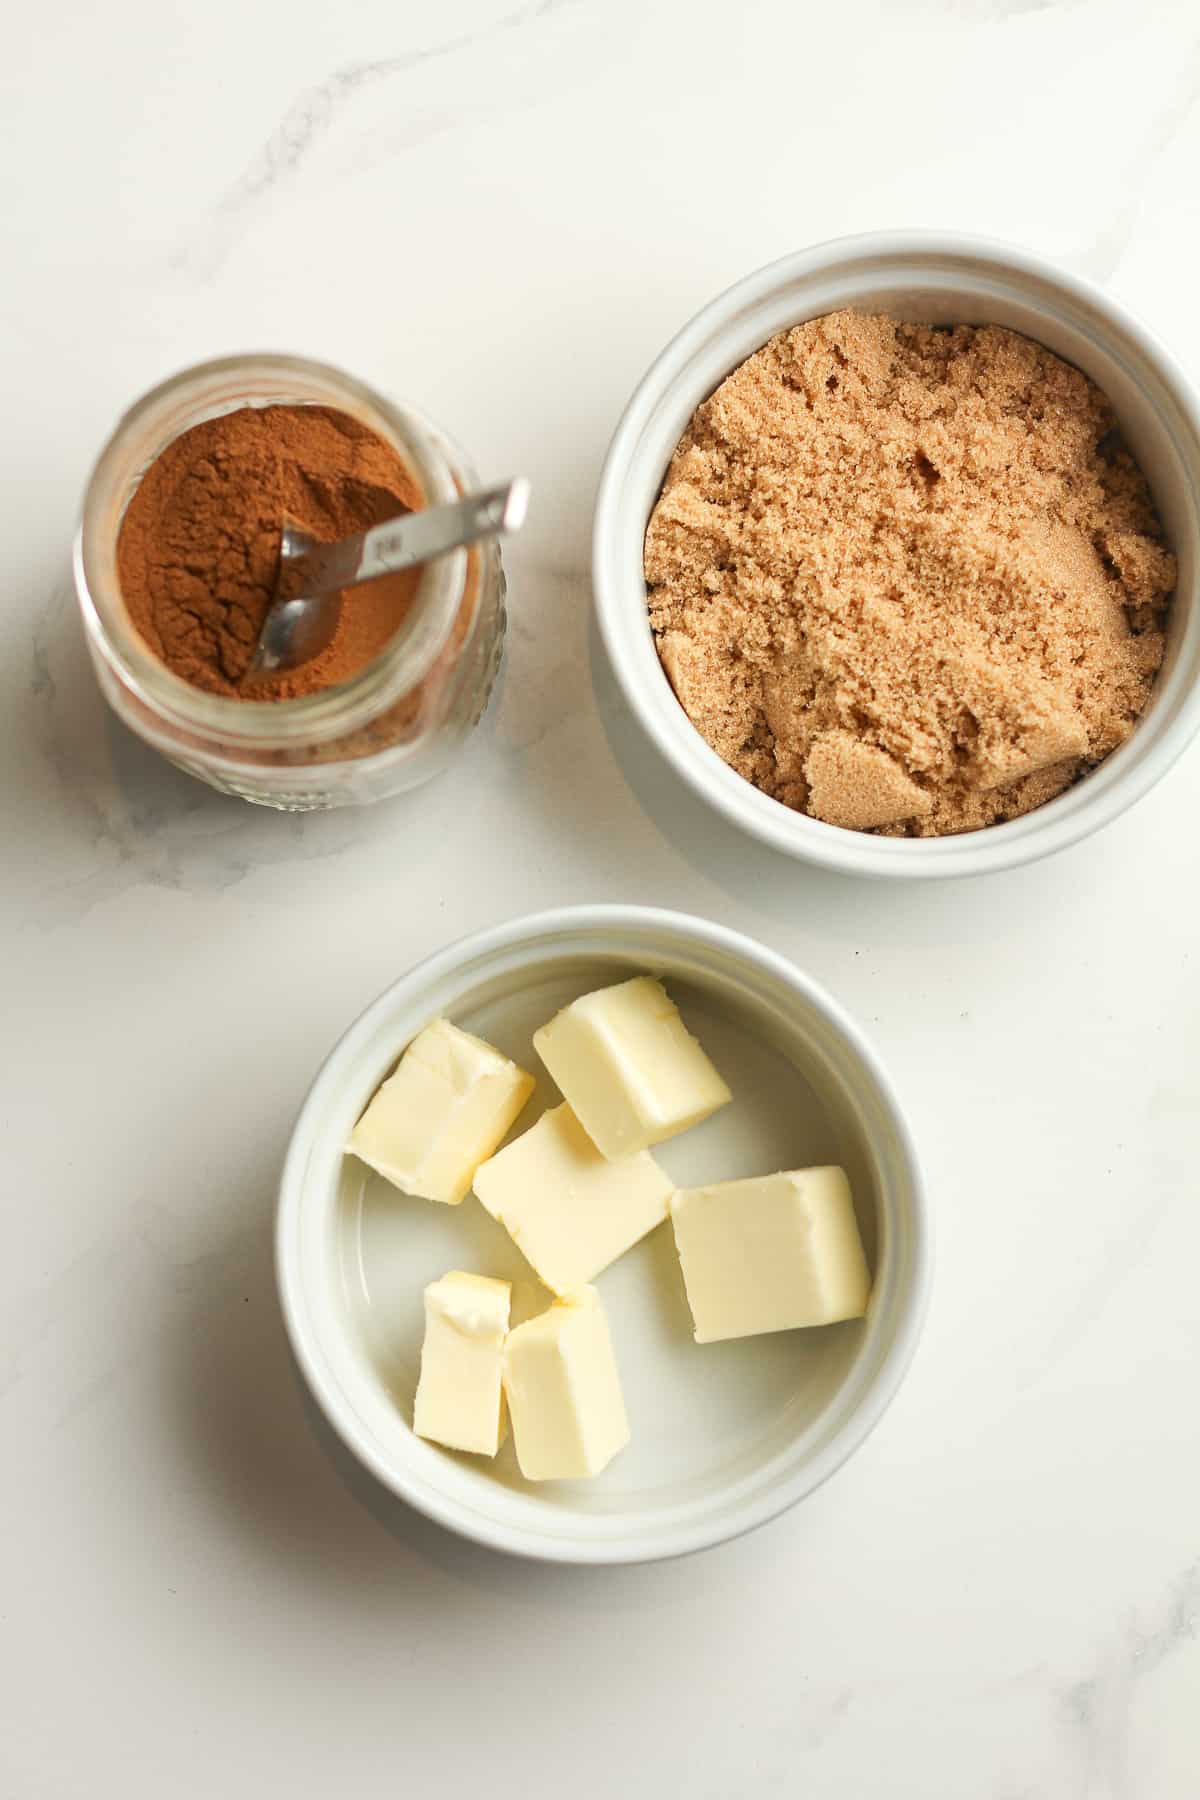 The butter, brown sugar and cinnamon - for the rolls.